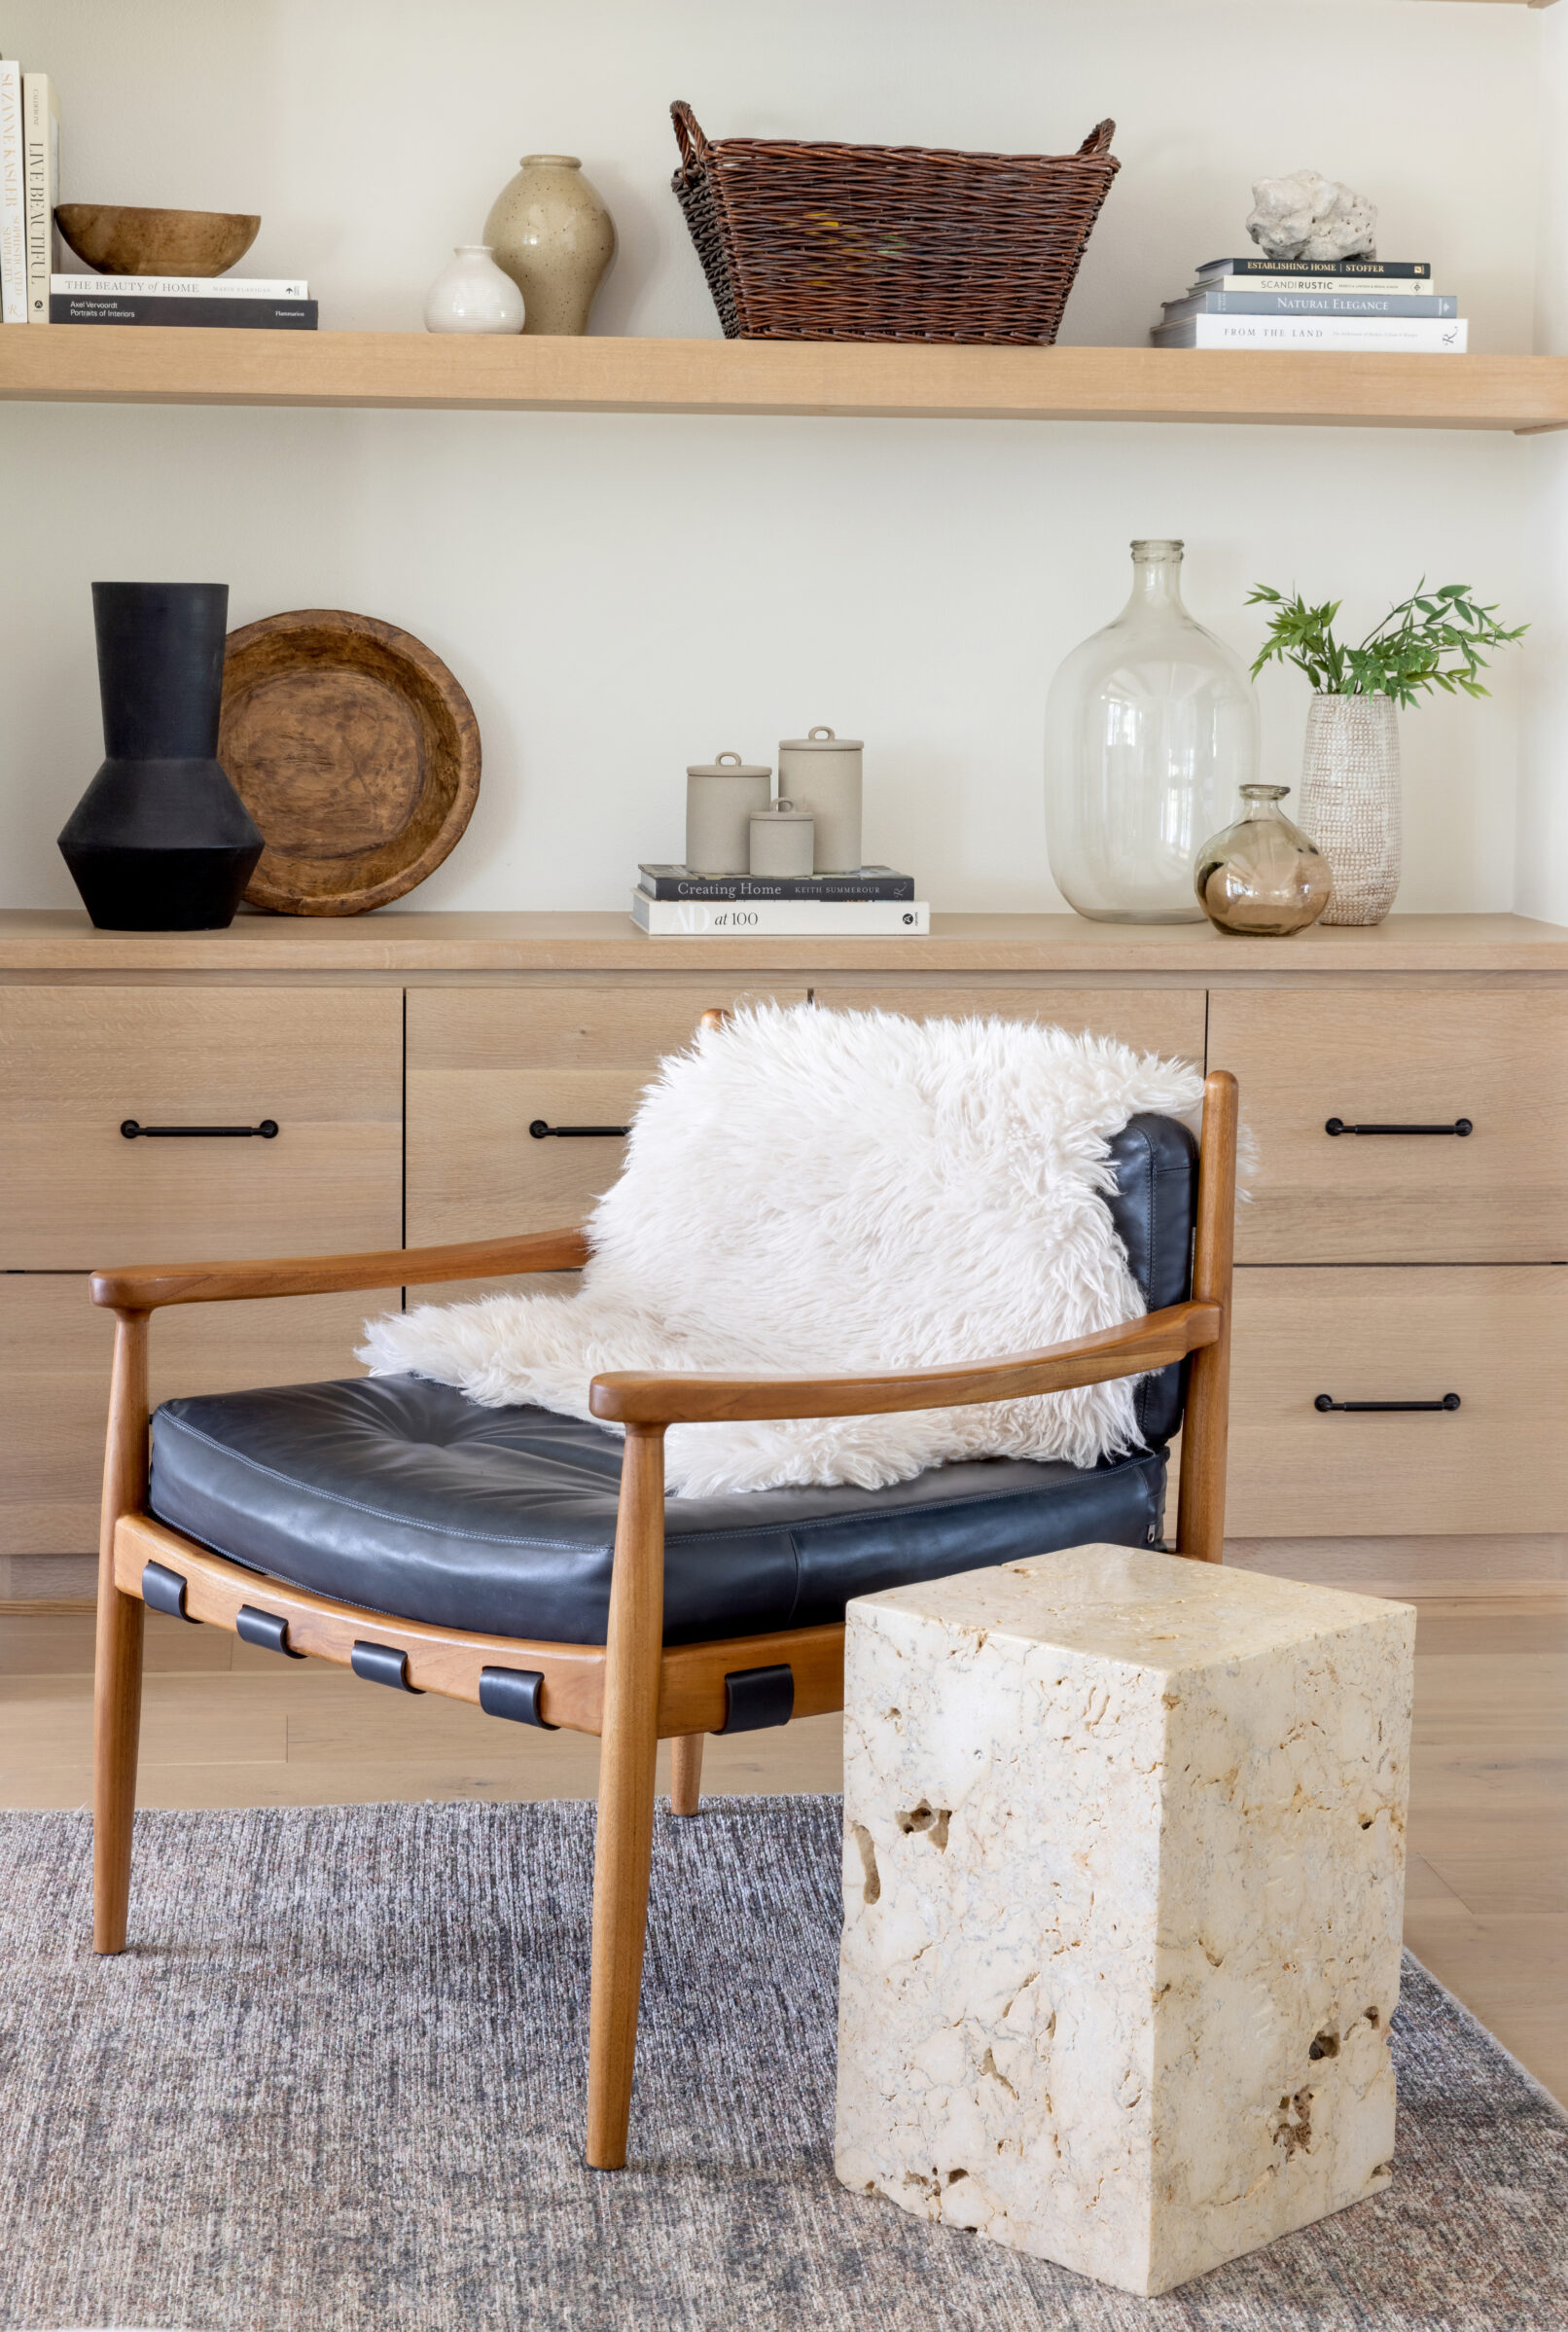 A mid century chair with black leather sits in front of a bookcase in this interior photo.